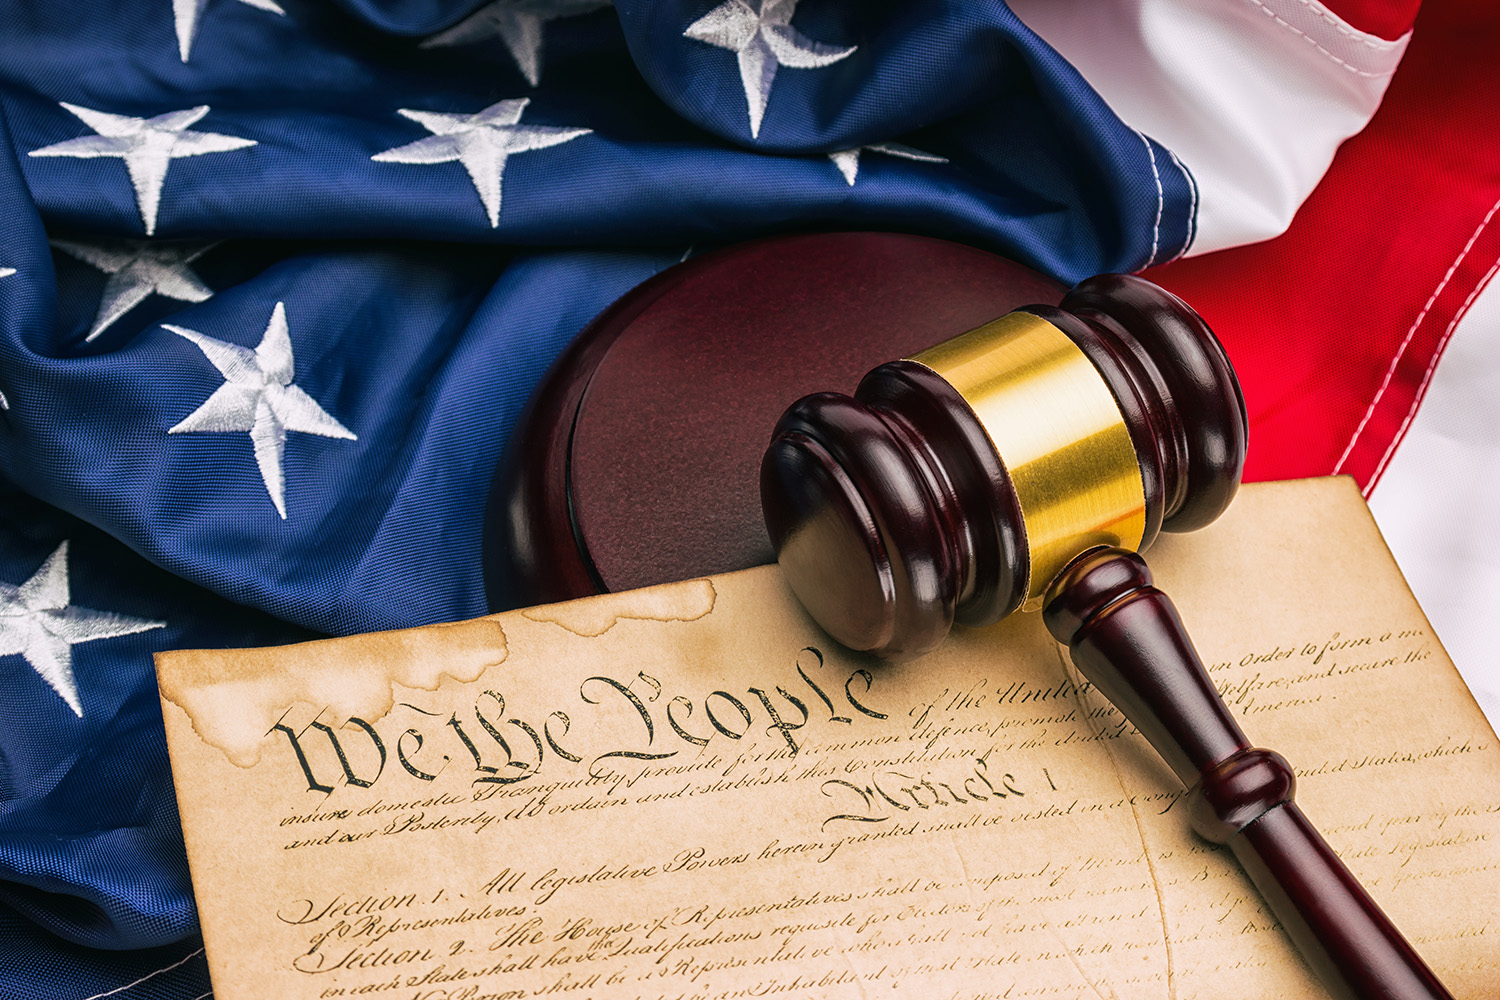 The U.S. Constitution: A Light About to be Extinguished